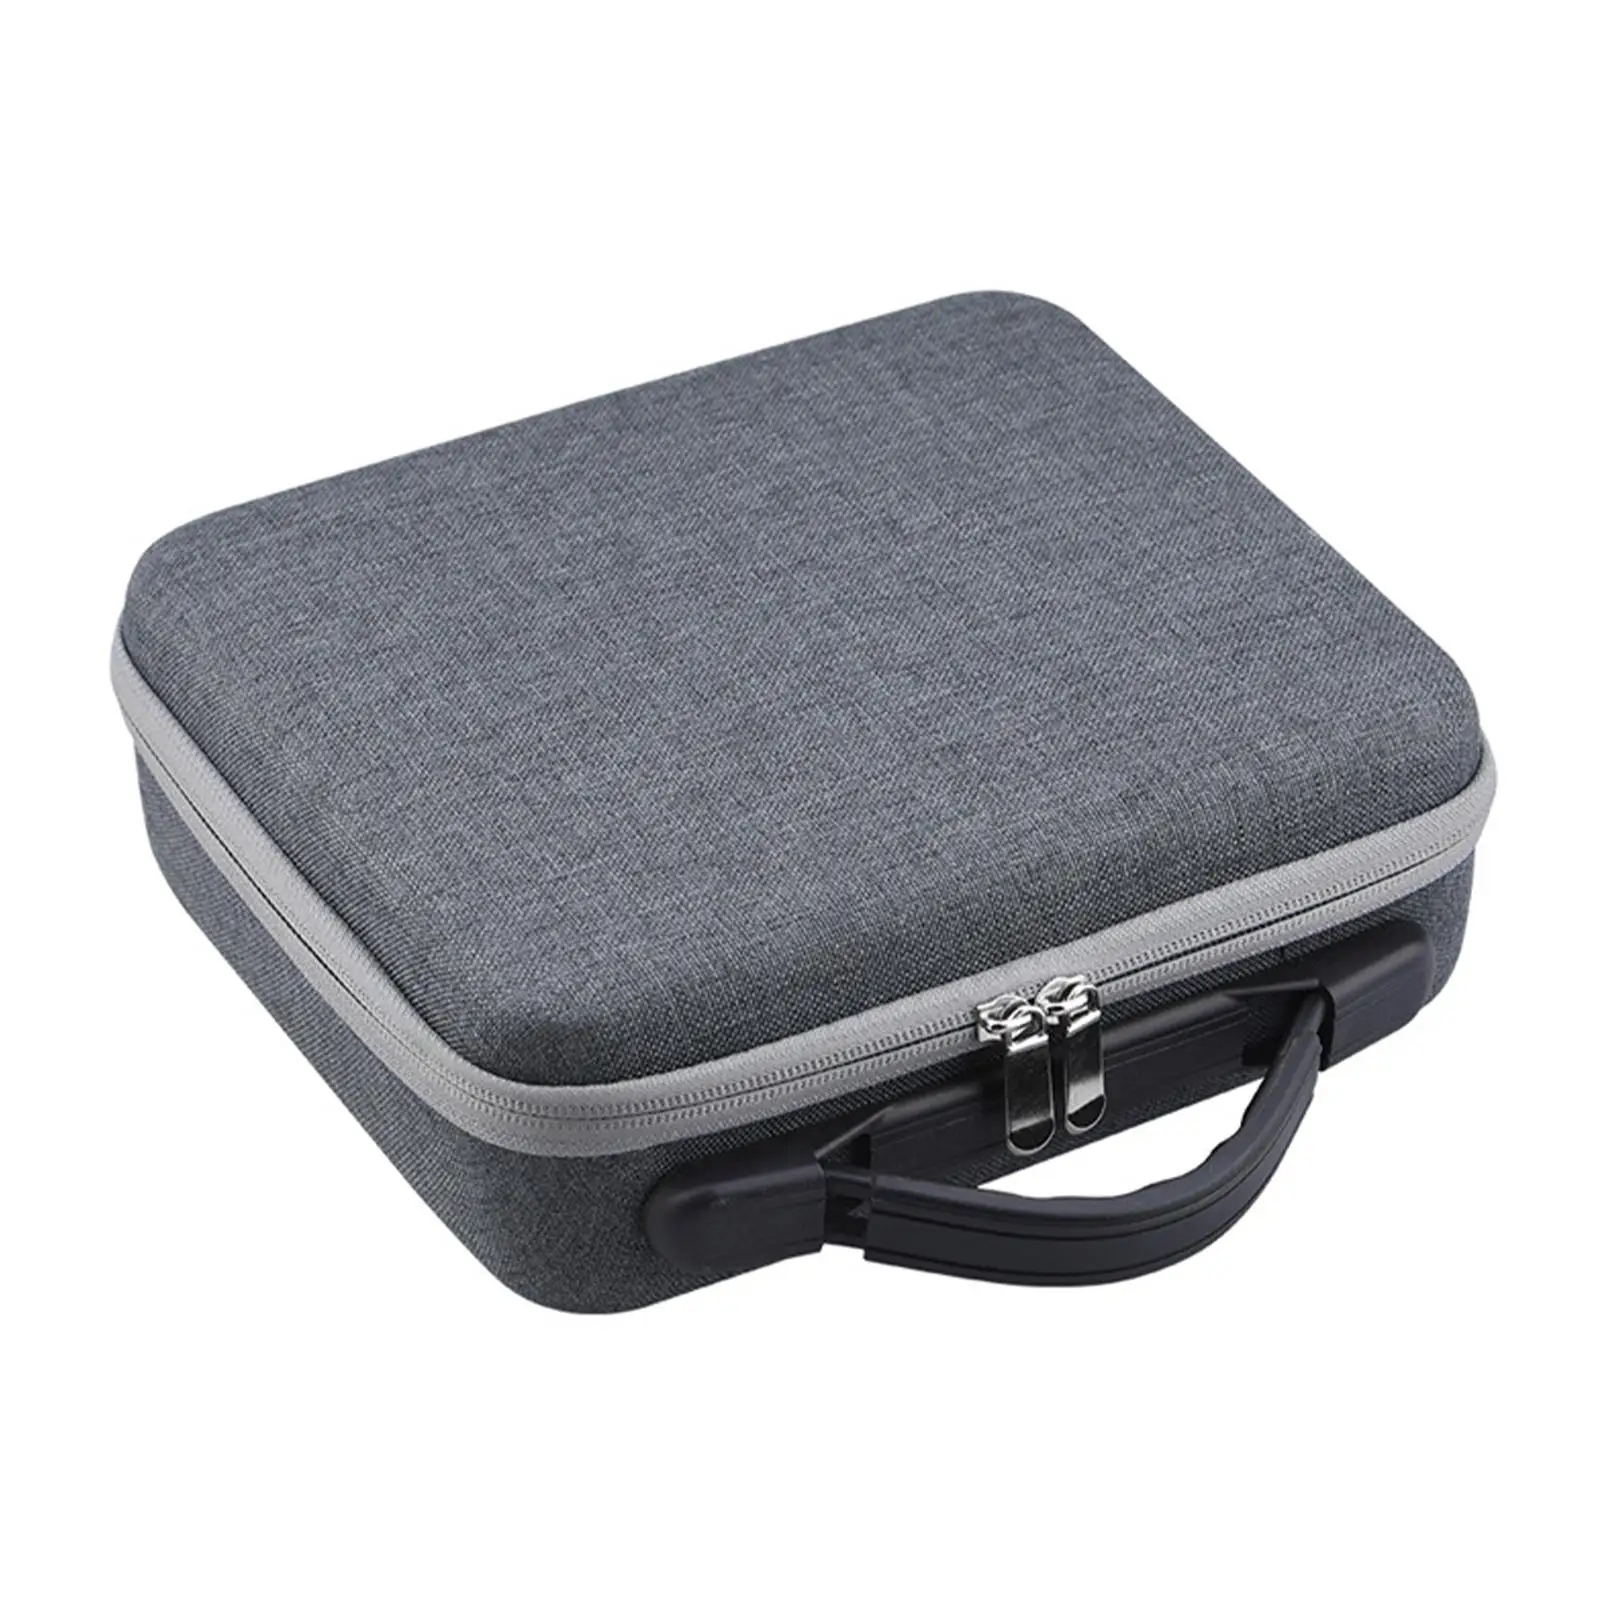 Travel Carrying Case Action Camera Accessories Scratch Resistant Large Capacity with Handle Professional Shockproof Handbag